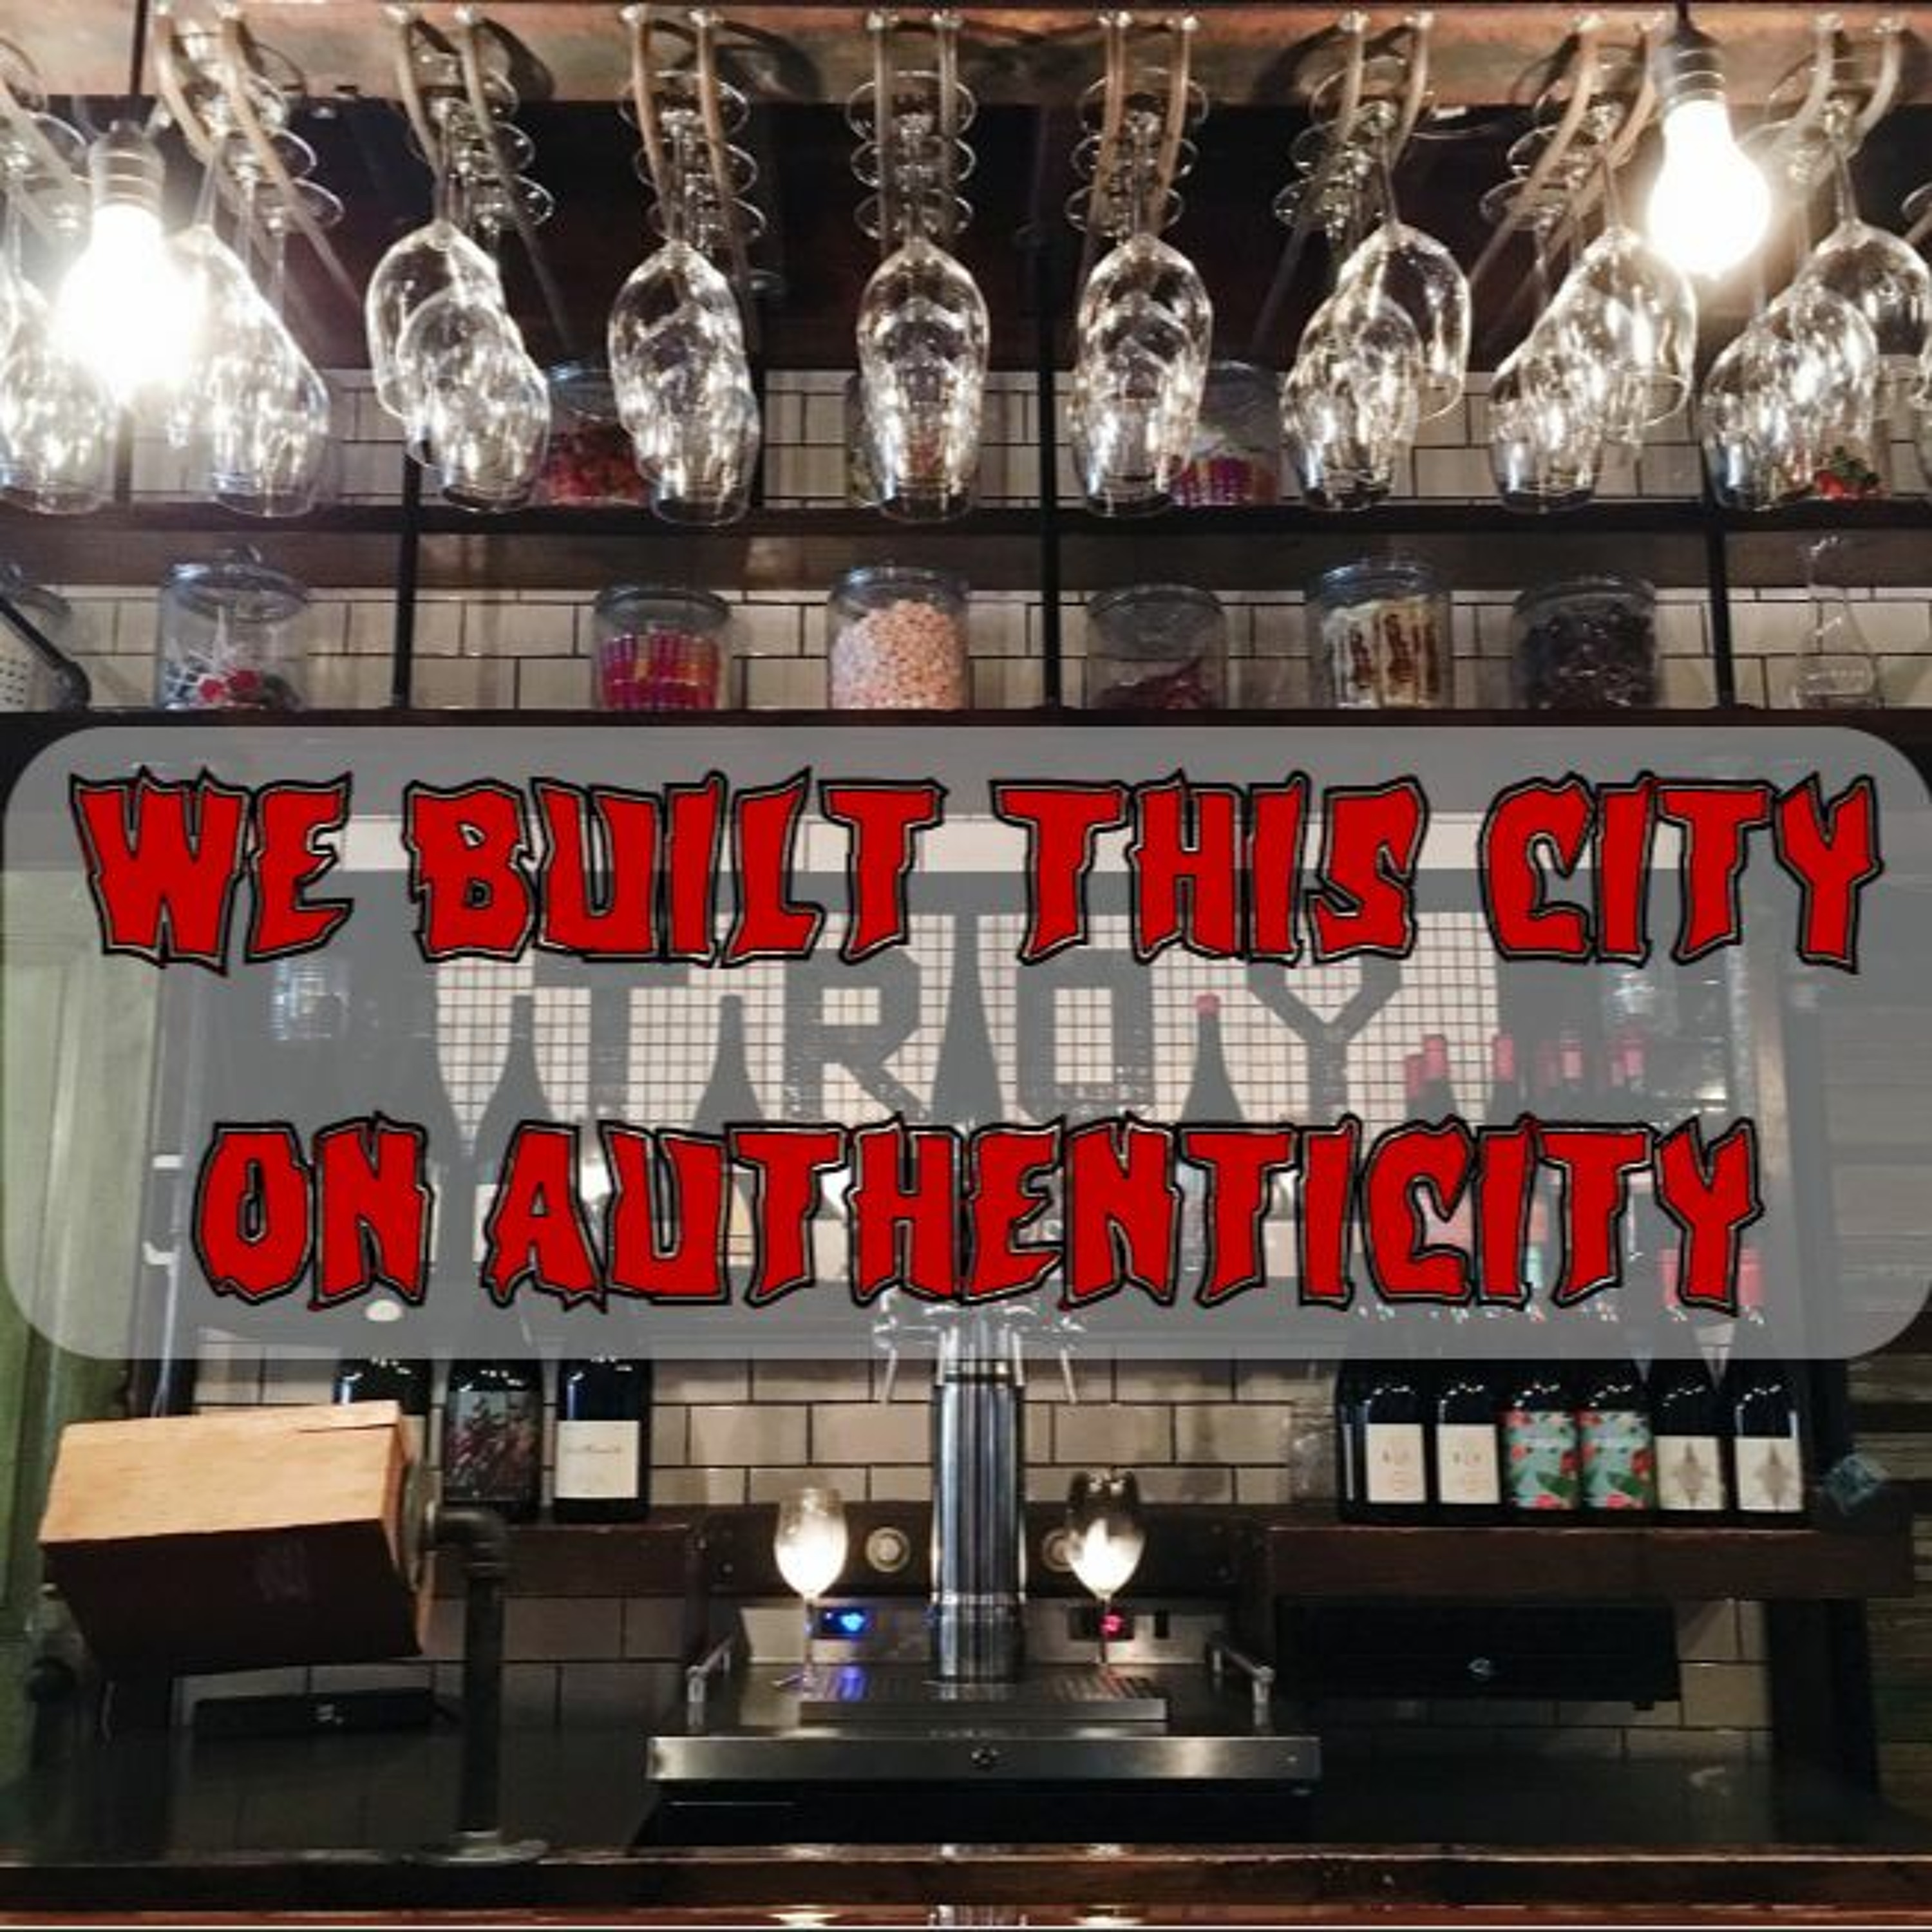 249/250. We Built This City on Authenticity (ft. David A. Banks)